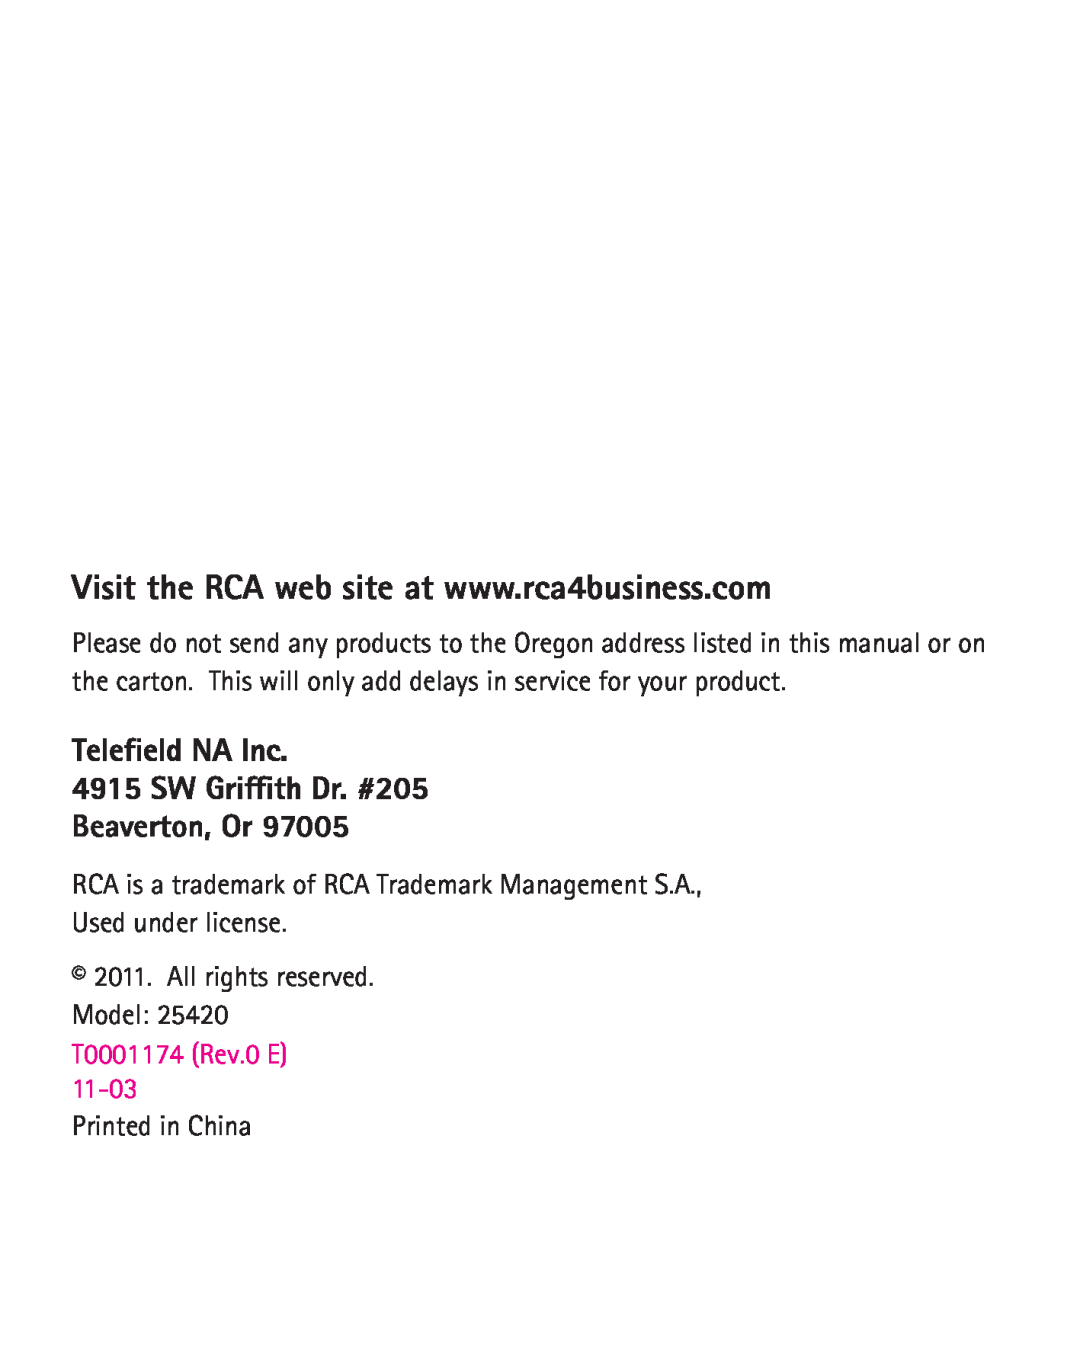 RCA 25420 Beaverton, Or, RCA is a trademark of RCA Trademark Management S.A Used under license, All rights reserved. Model 